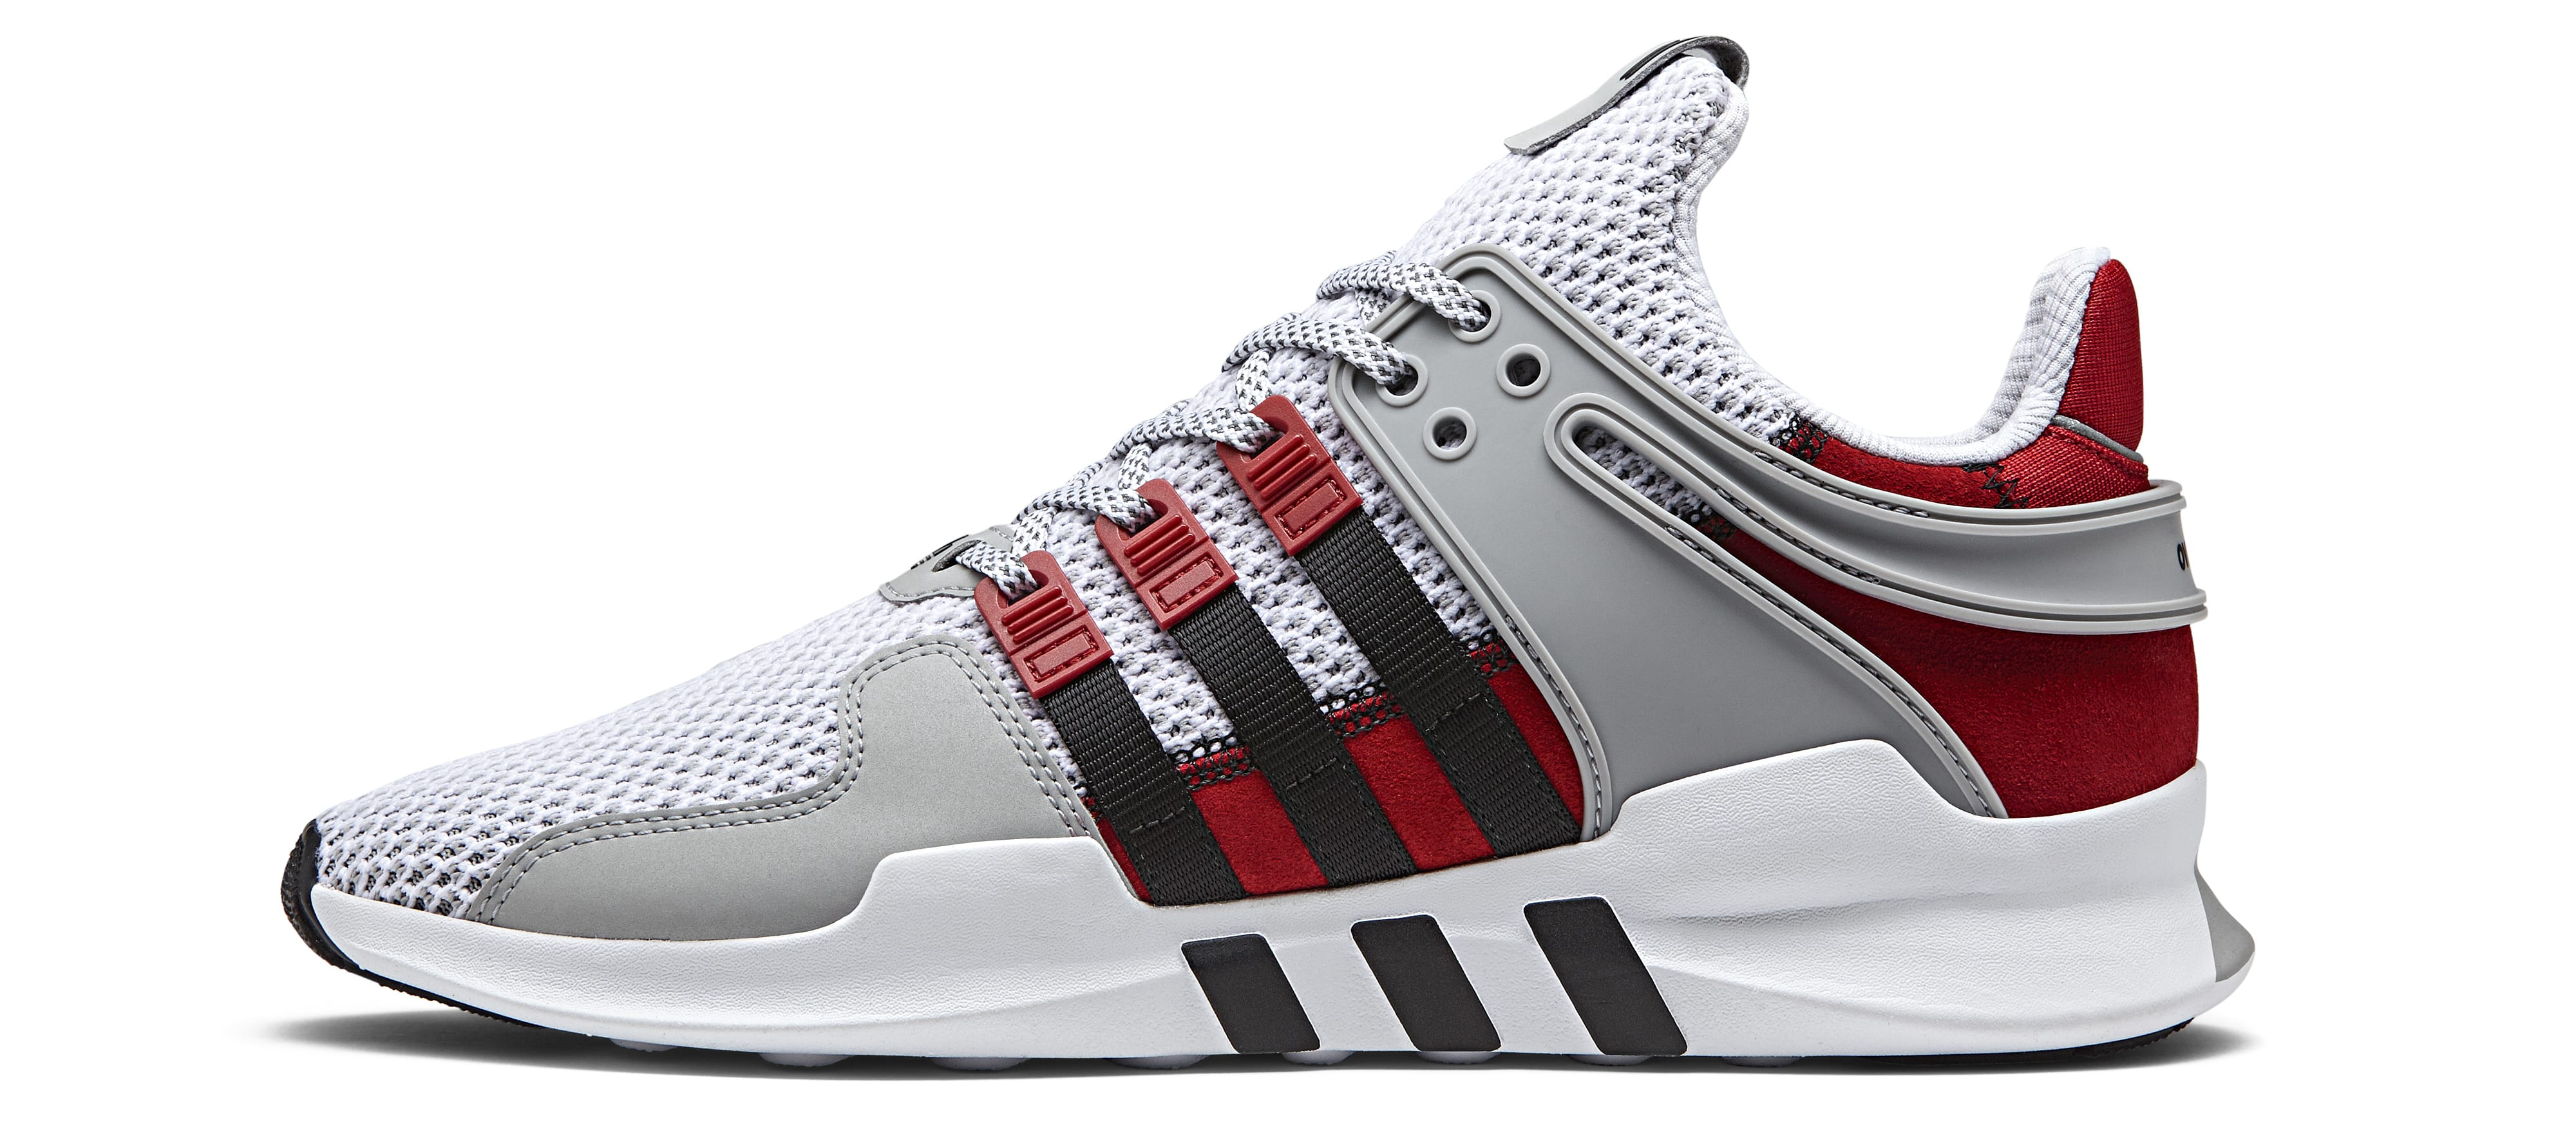 Overkill x Adidas EQT Support ADV BY2939